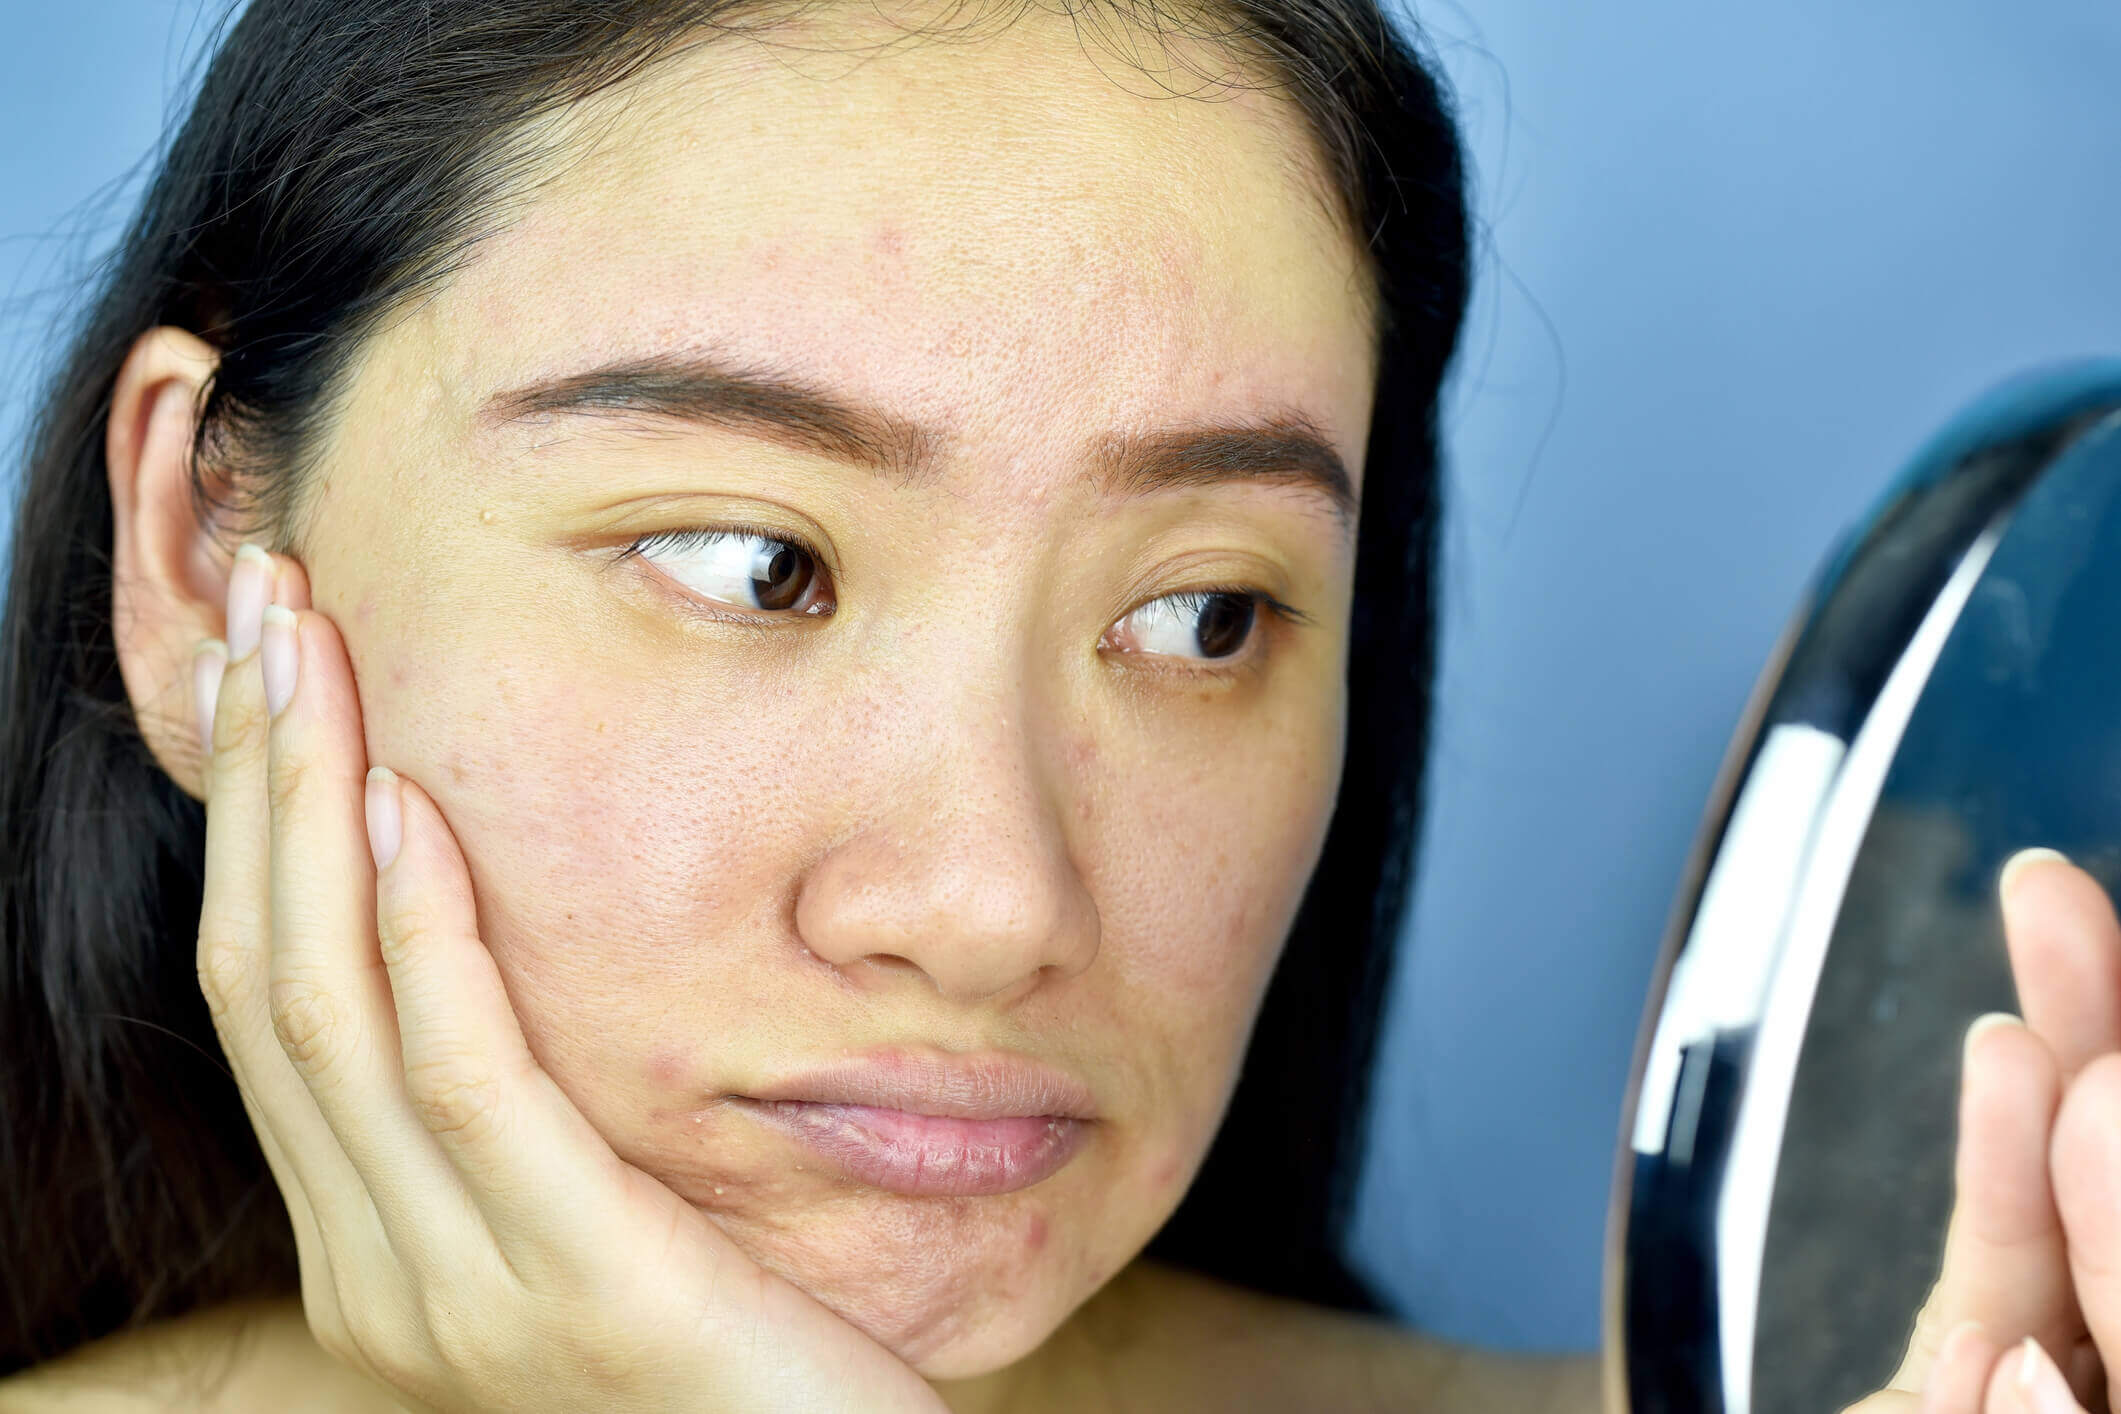 Clogged Pores: Why It Happens and What You Can Do About It